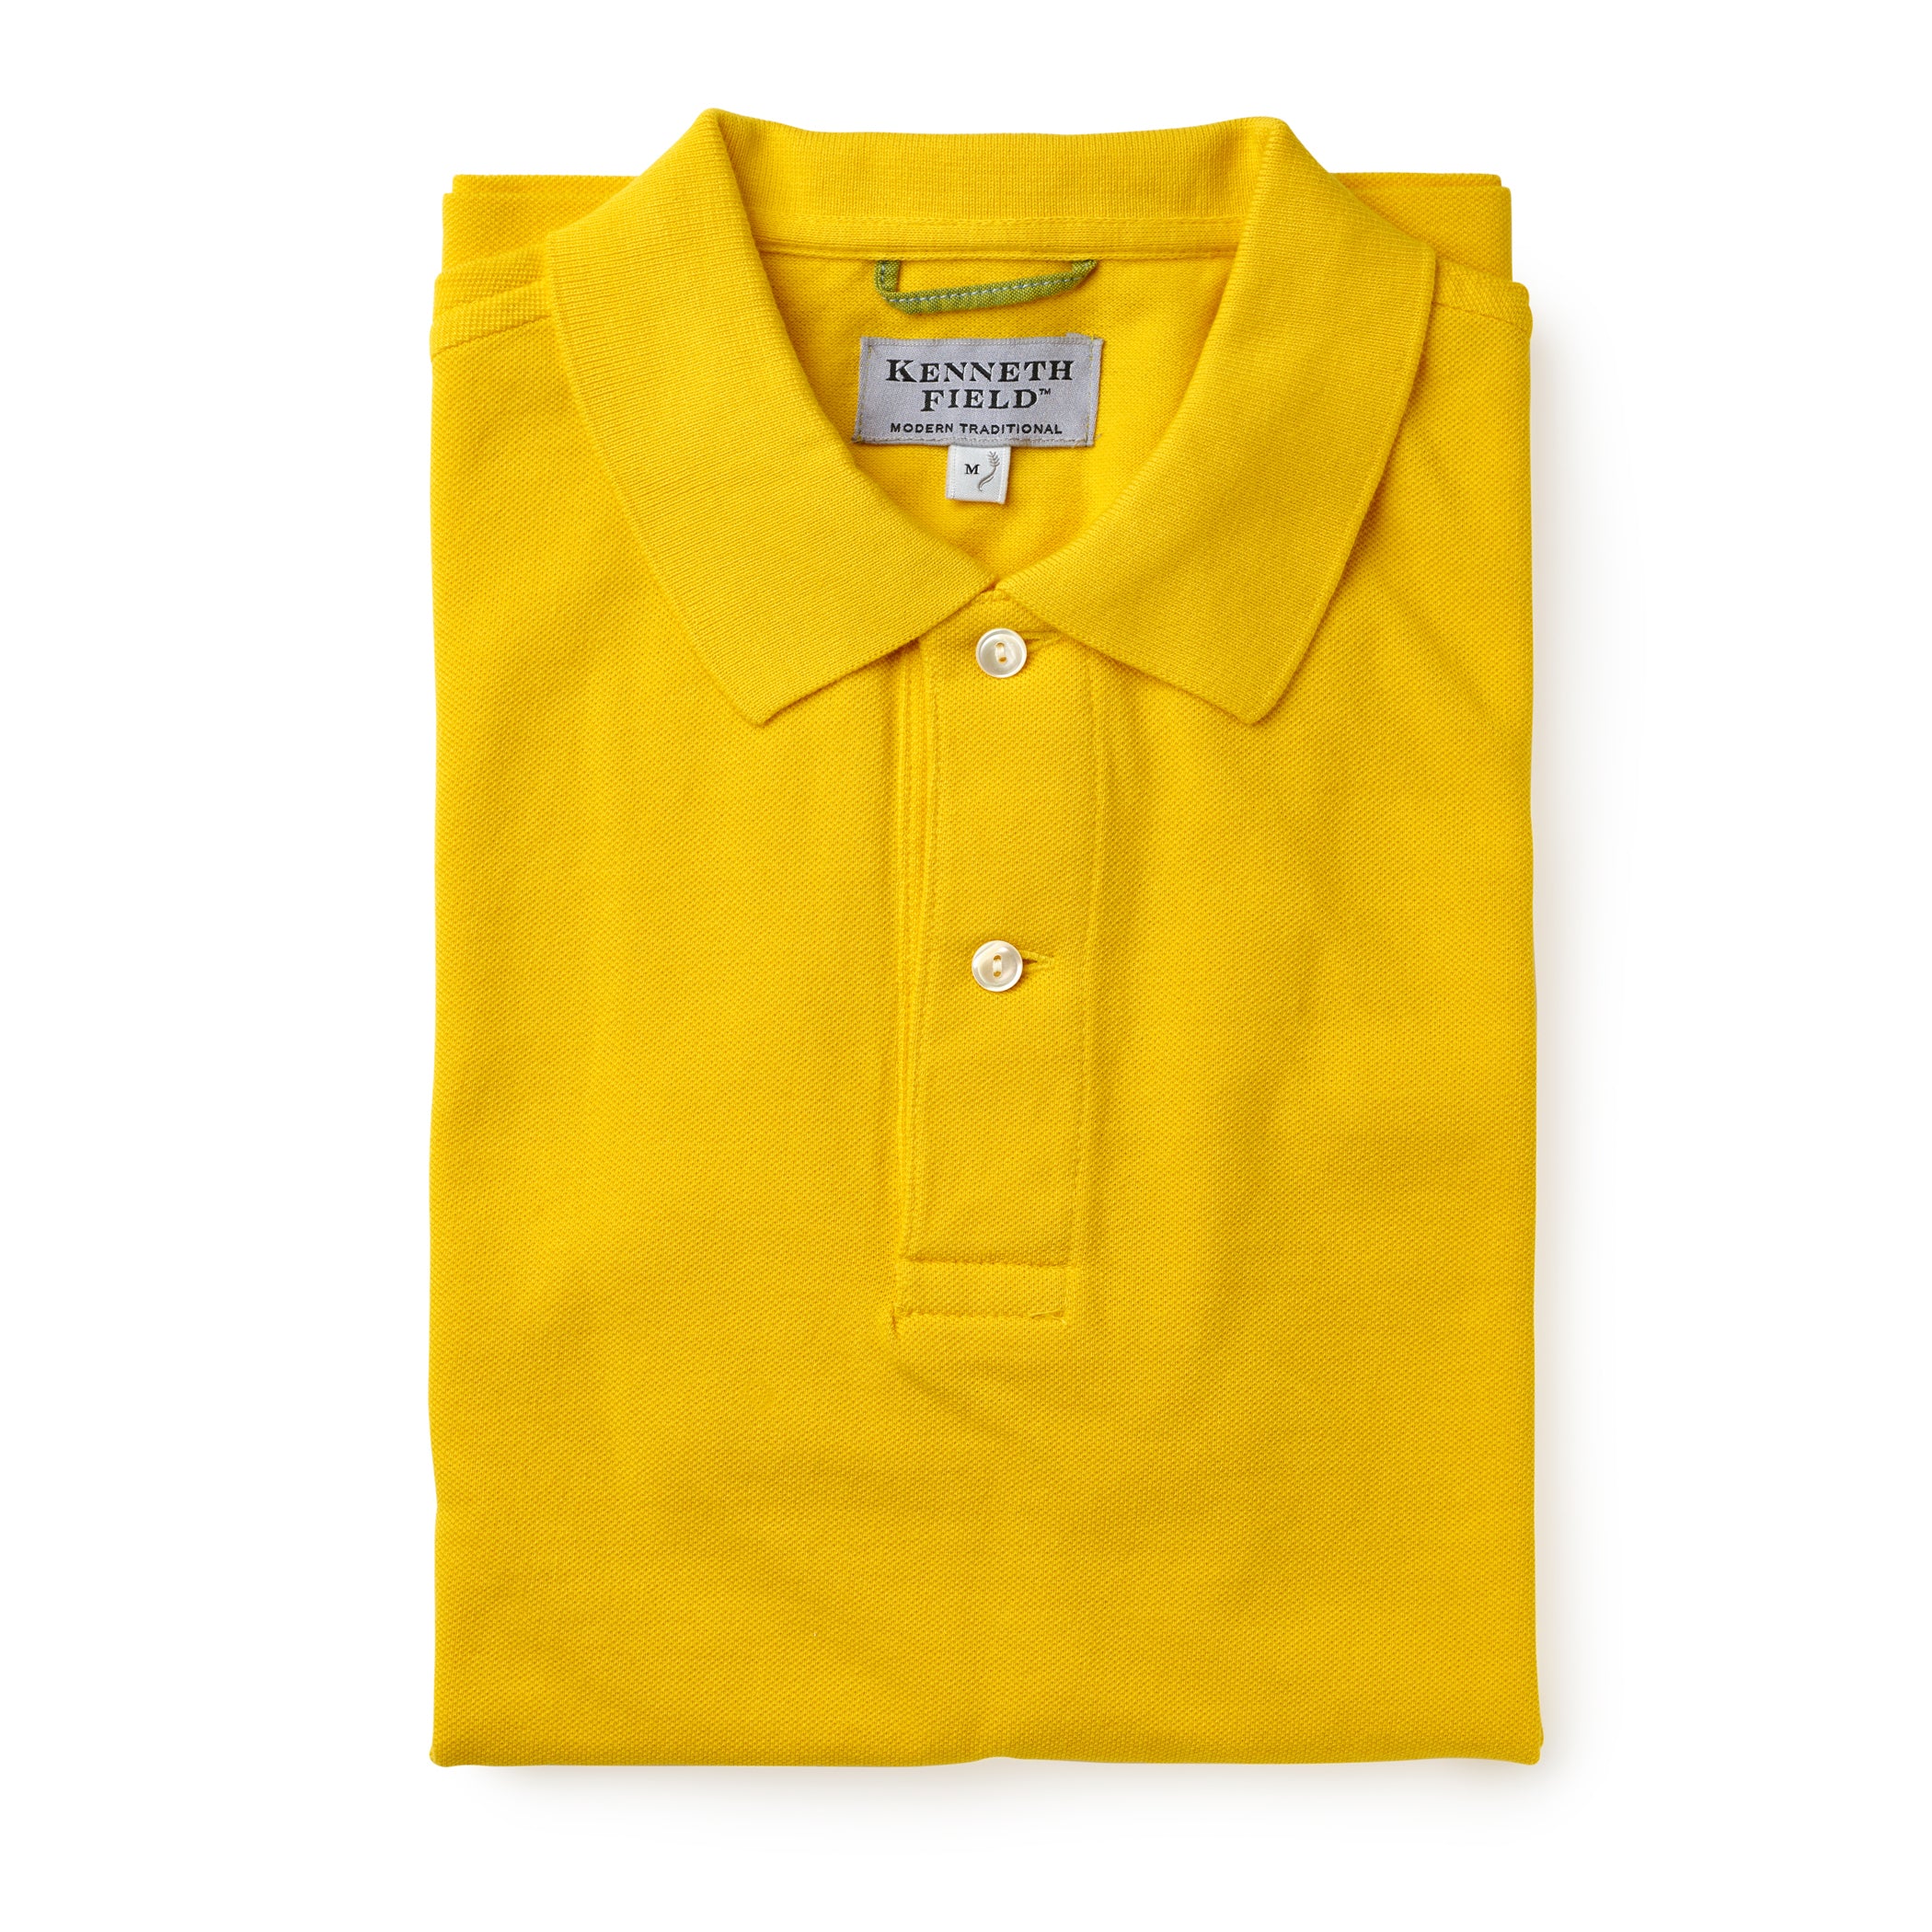 Kenneth Field Riviera Yellow Short Sleeve Knitted Piqué Polo Shirt